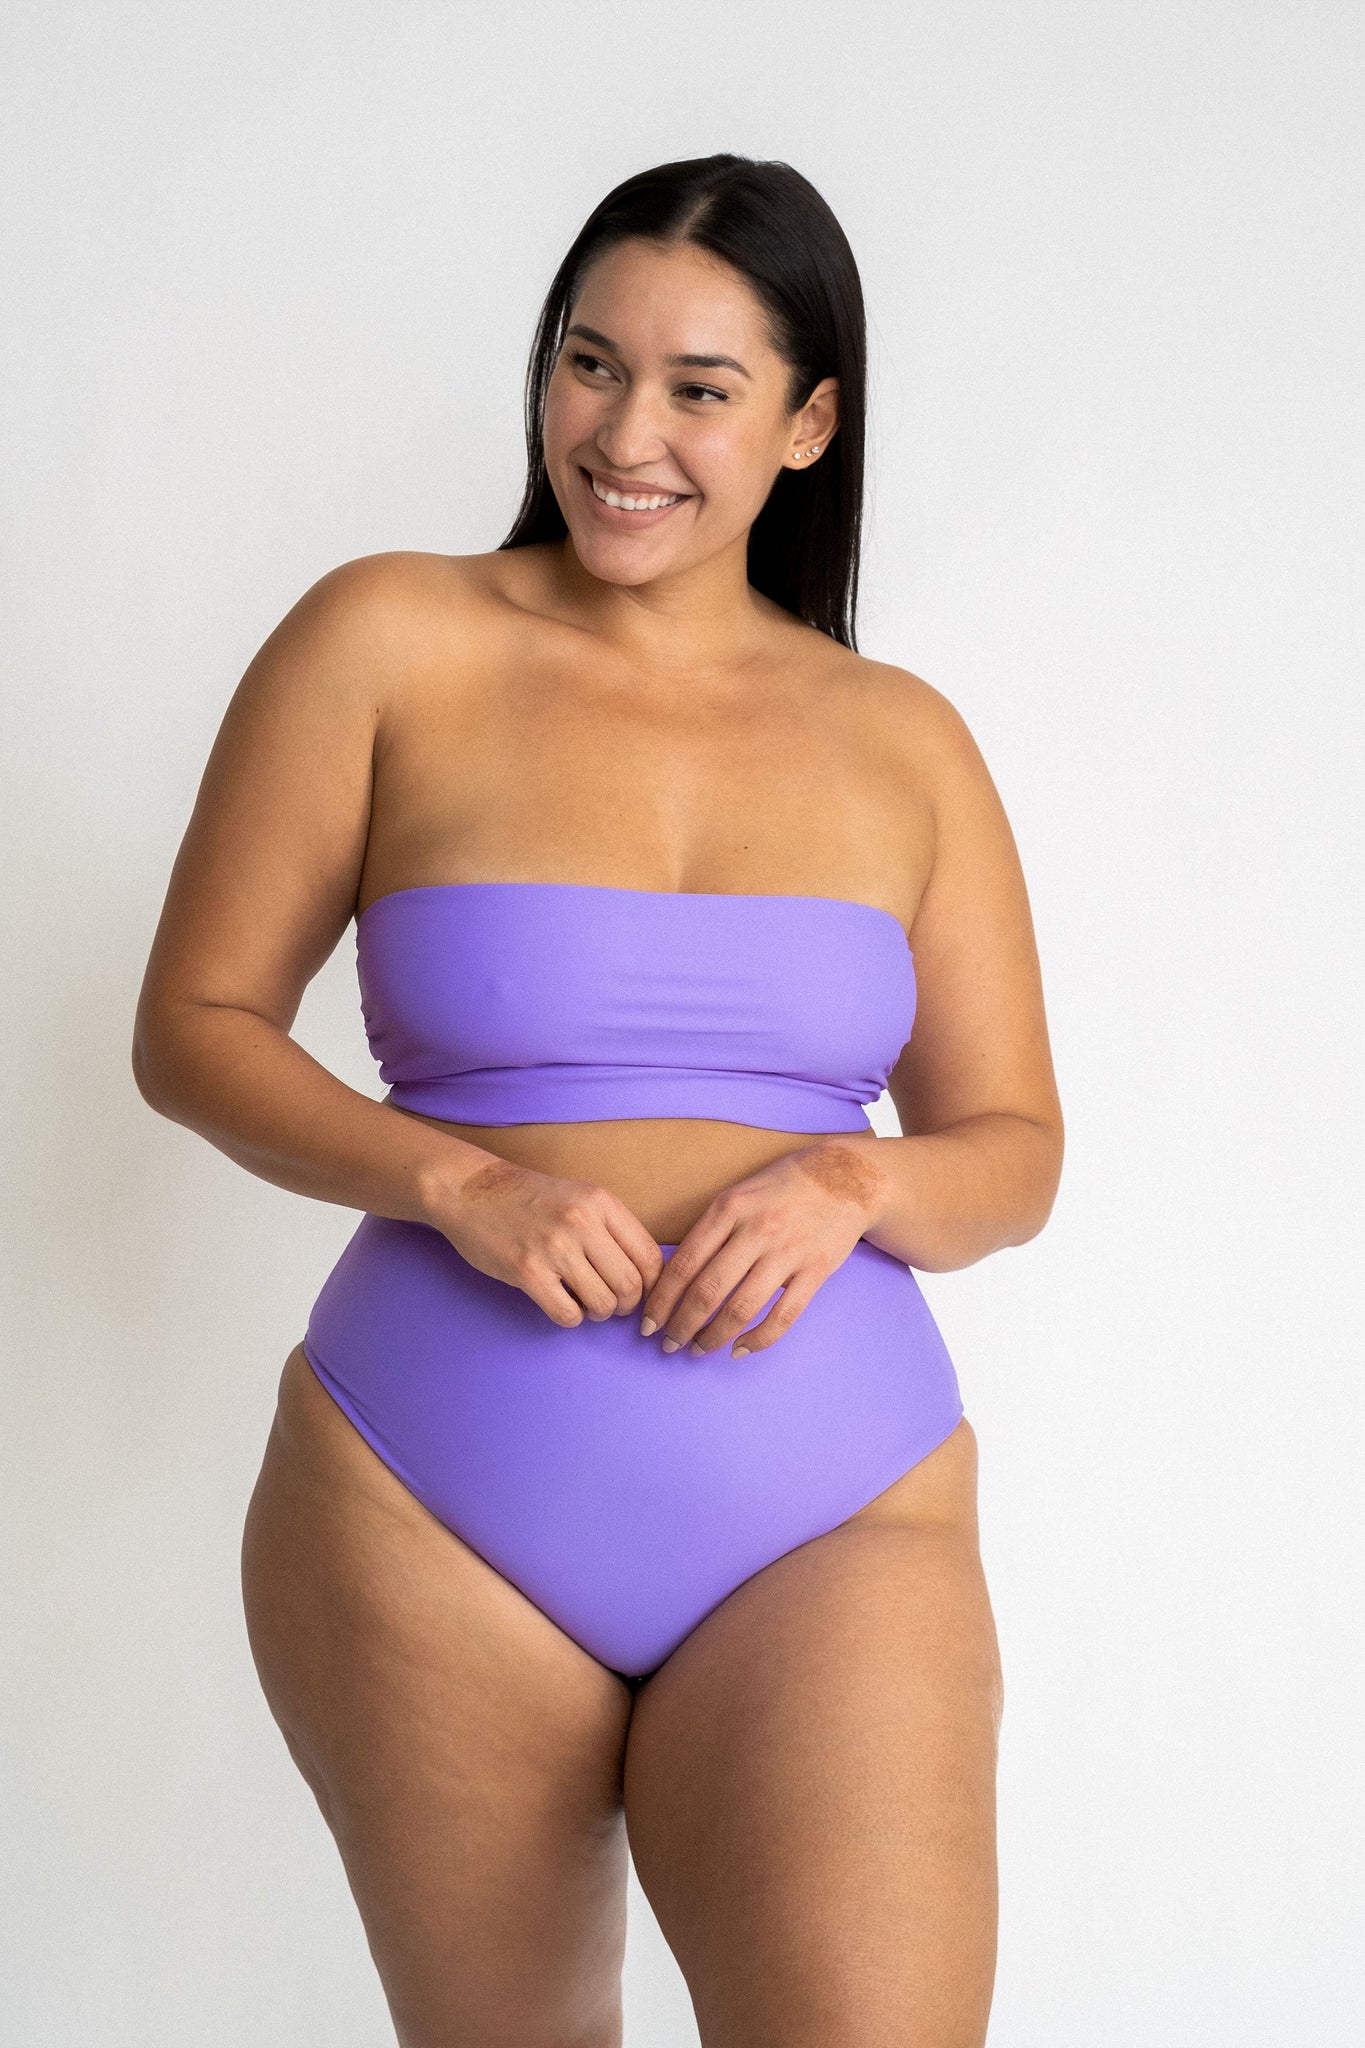 Woman standing with her hands crossed in front of her wearing bright purple high waisted bikini bottoms with a matching bright purple strapless bandeau bikini top.